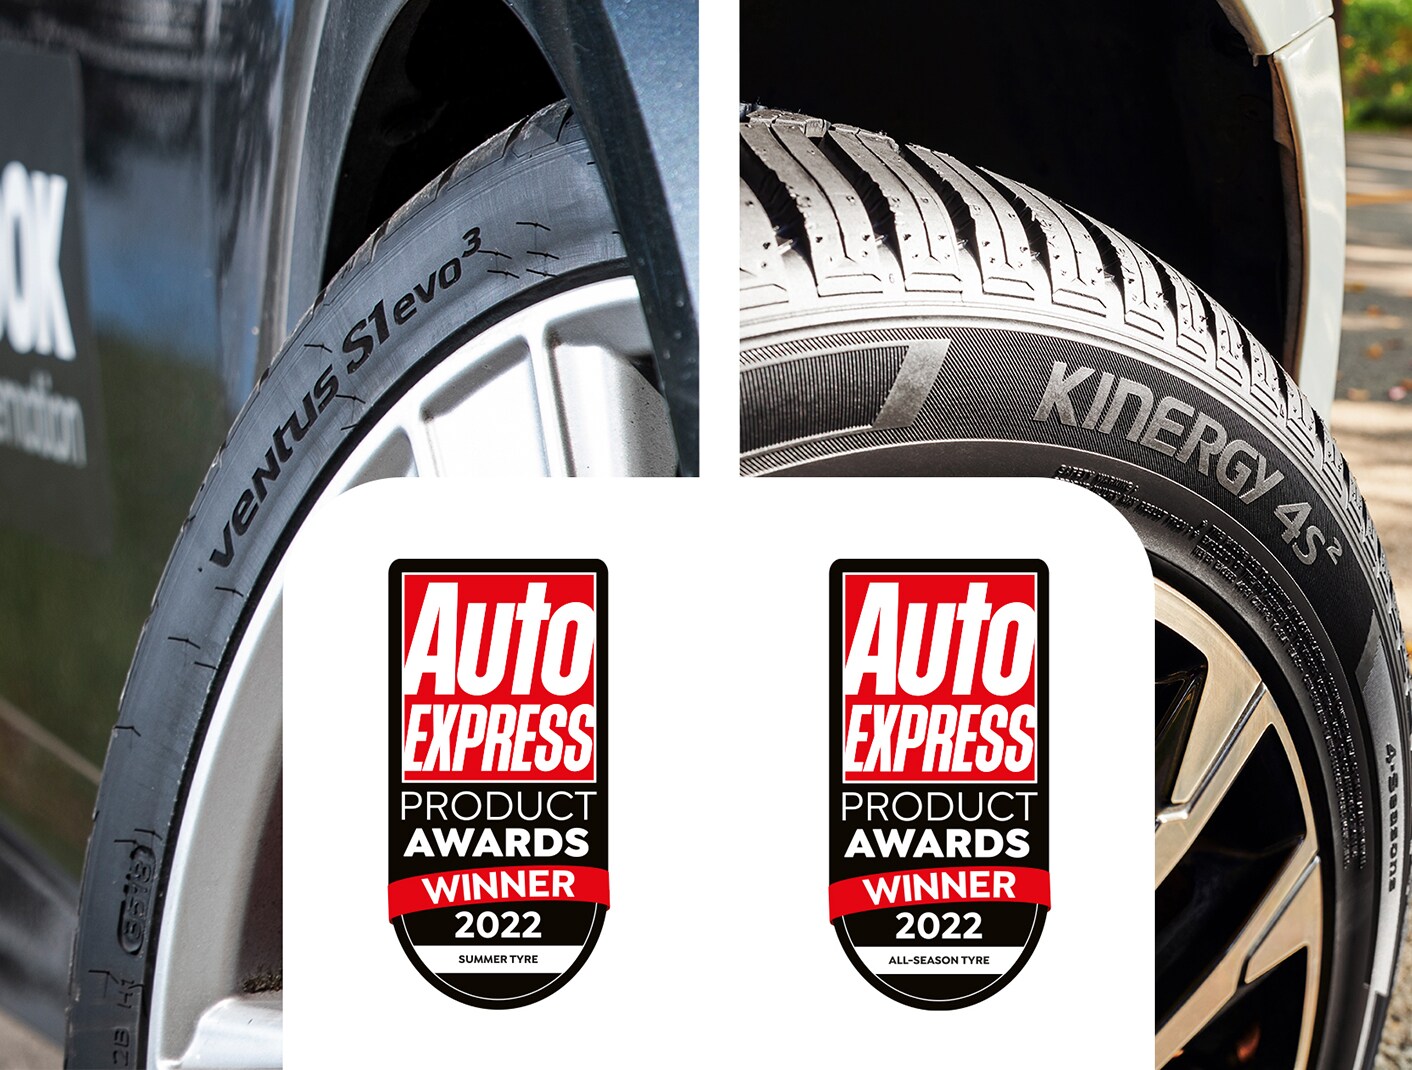 Hankook Tire gains three awards at the 2022 Auto Express Product of the Year Awards including two wins